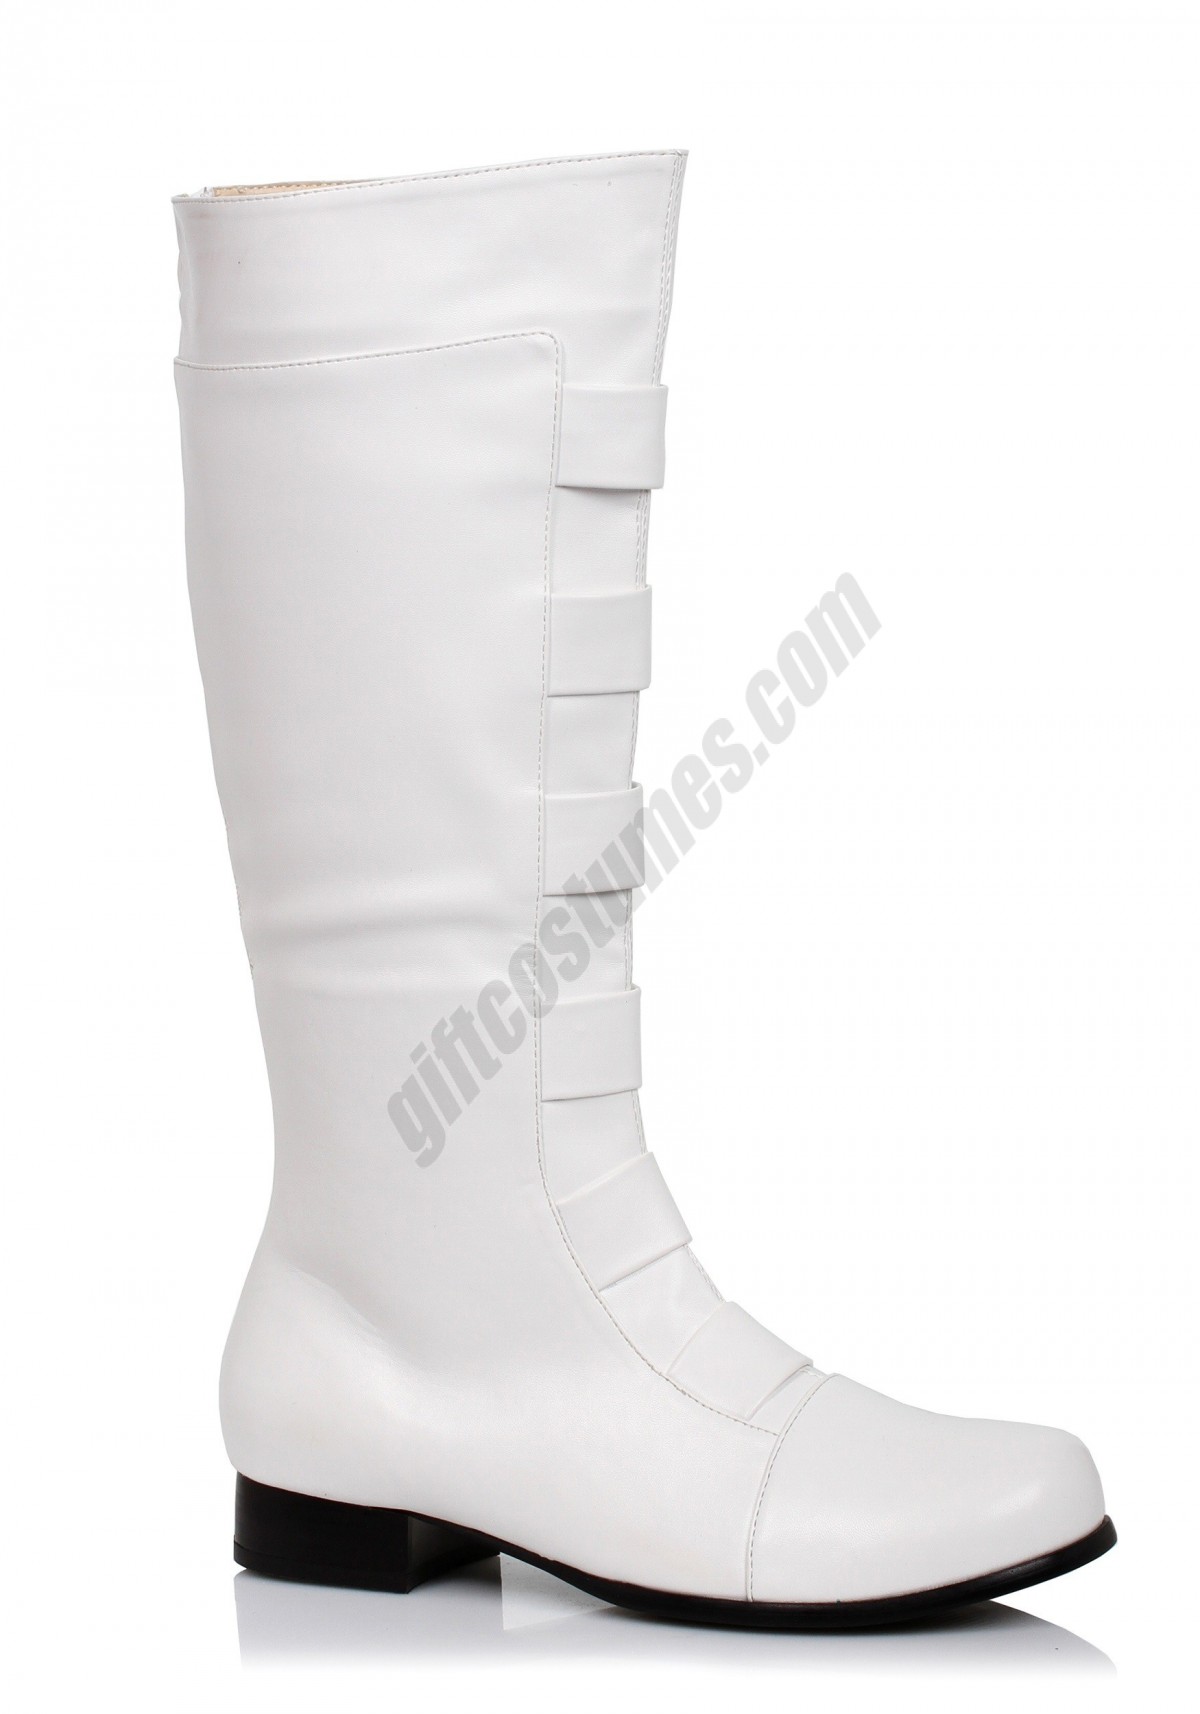 Adult White Superhero Boots Promotions - -0